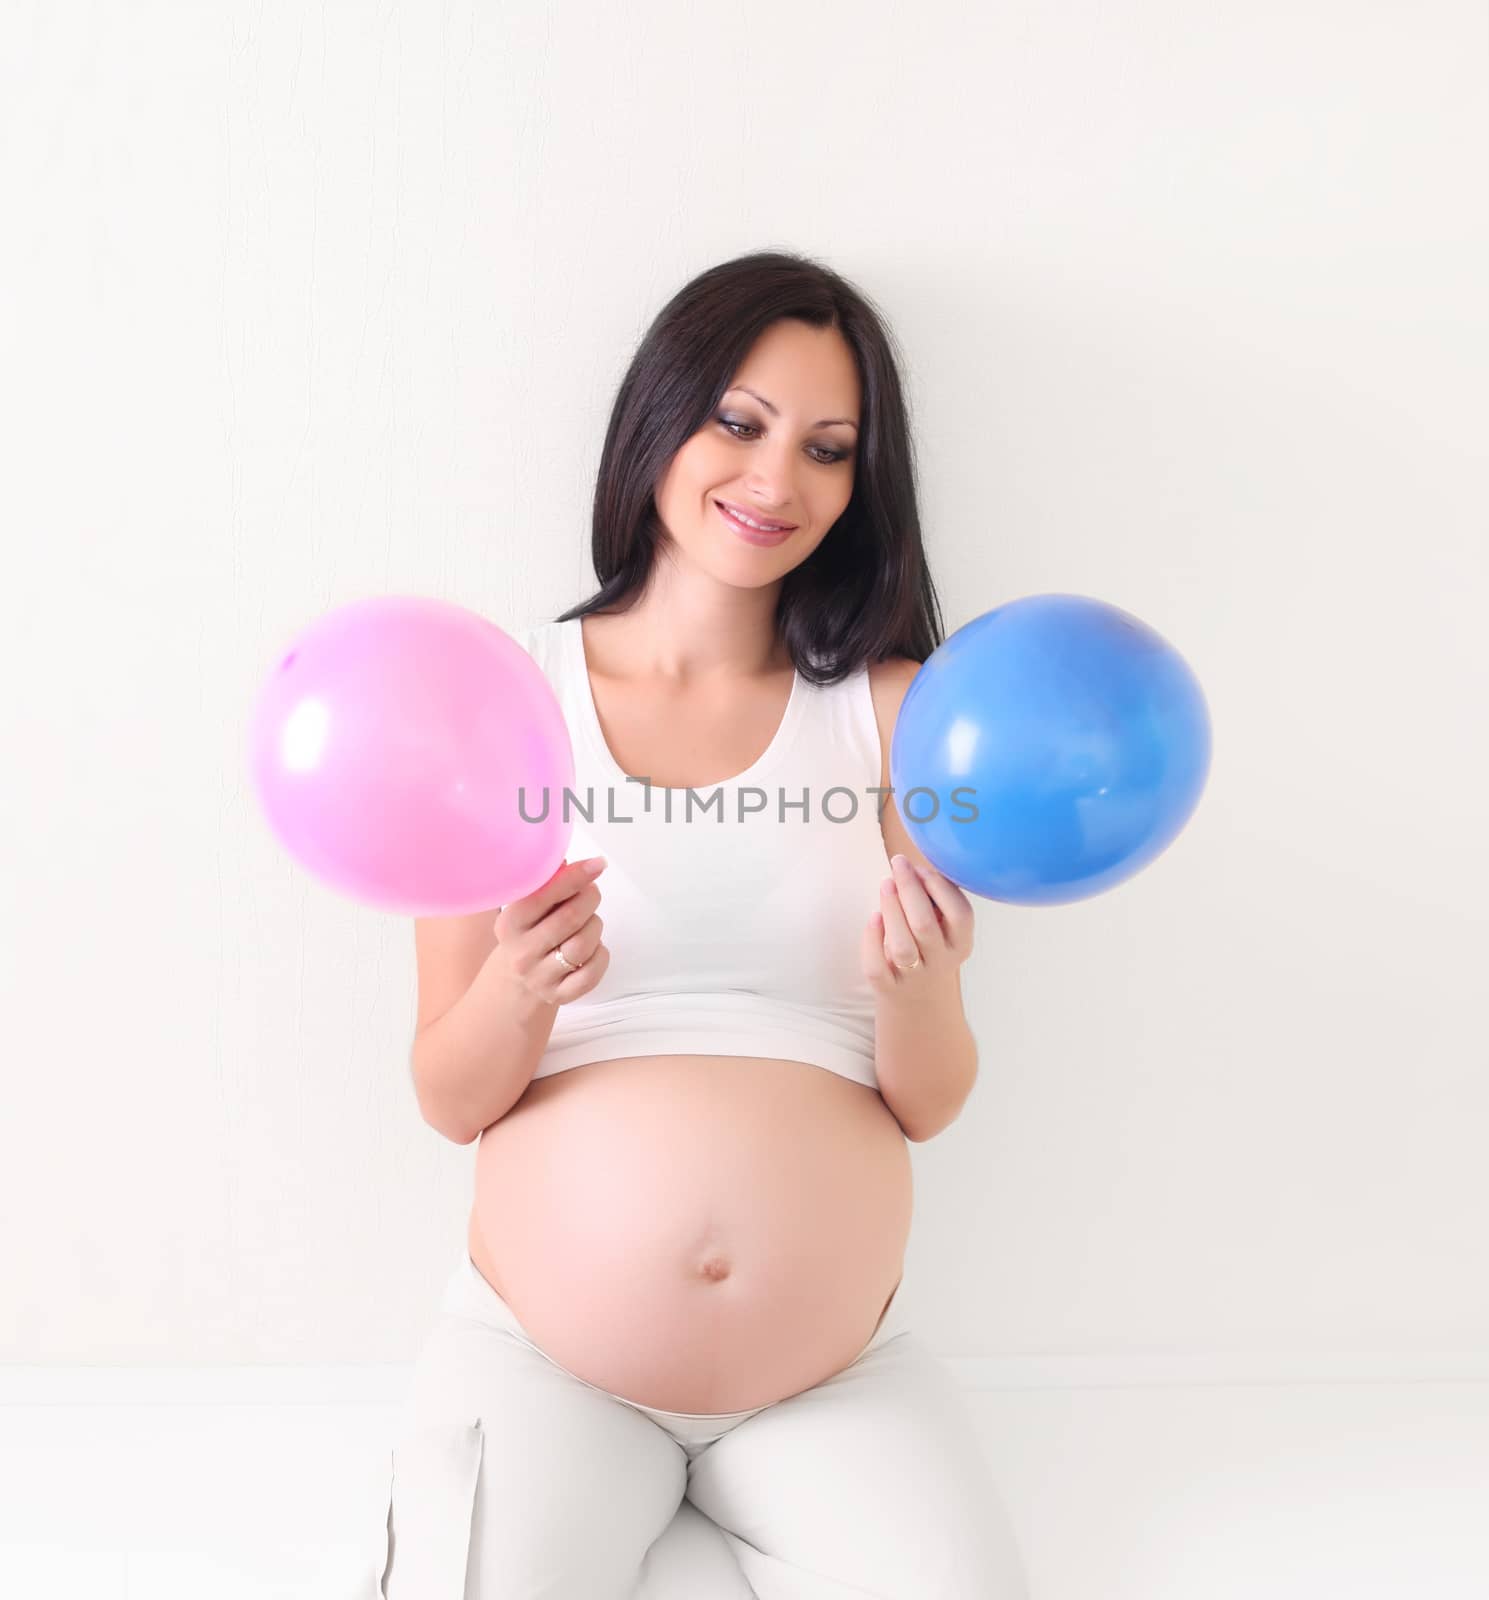 pregnant woman with blue and pink balloon by rudchenko